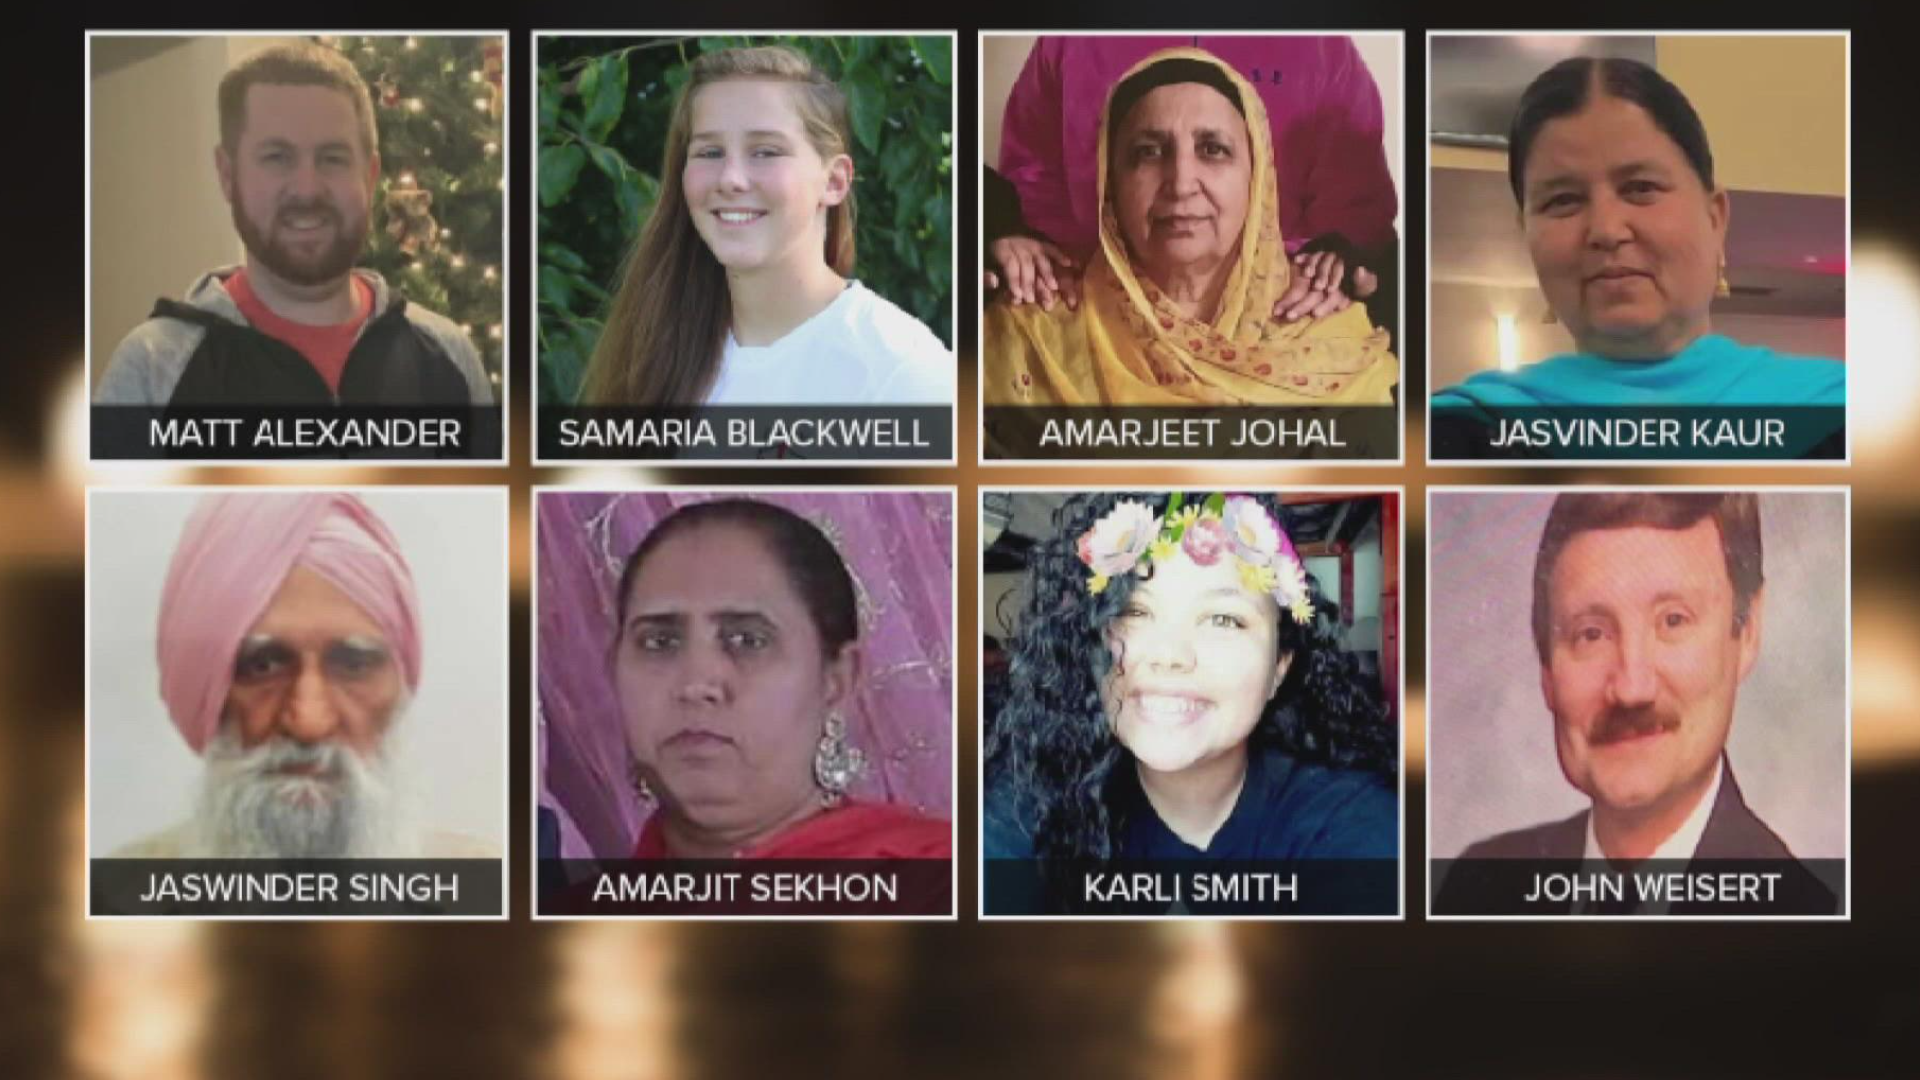 8 people lost their lives when a gunman opened fire one year ago.